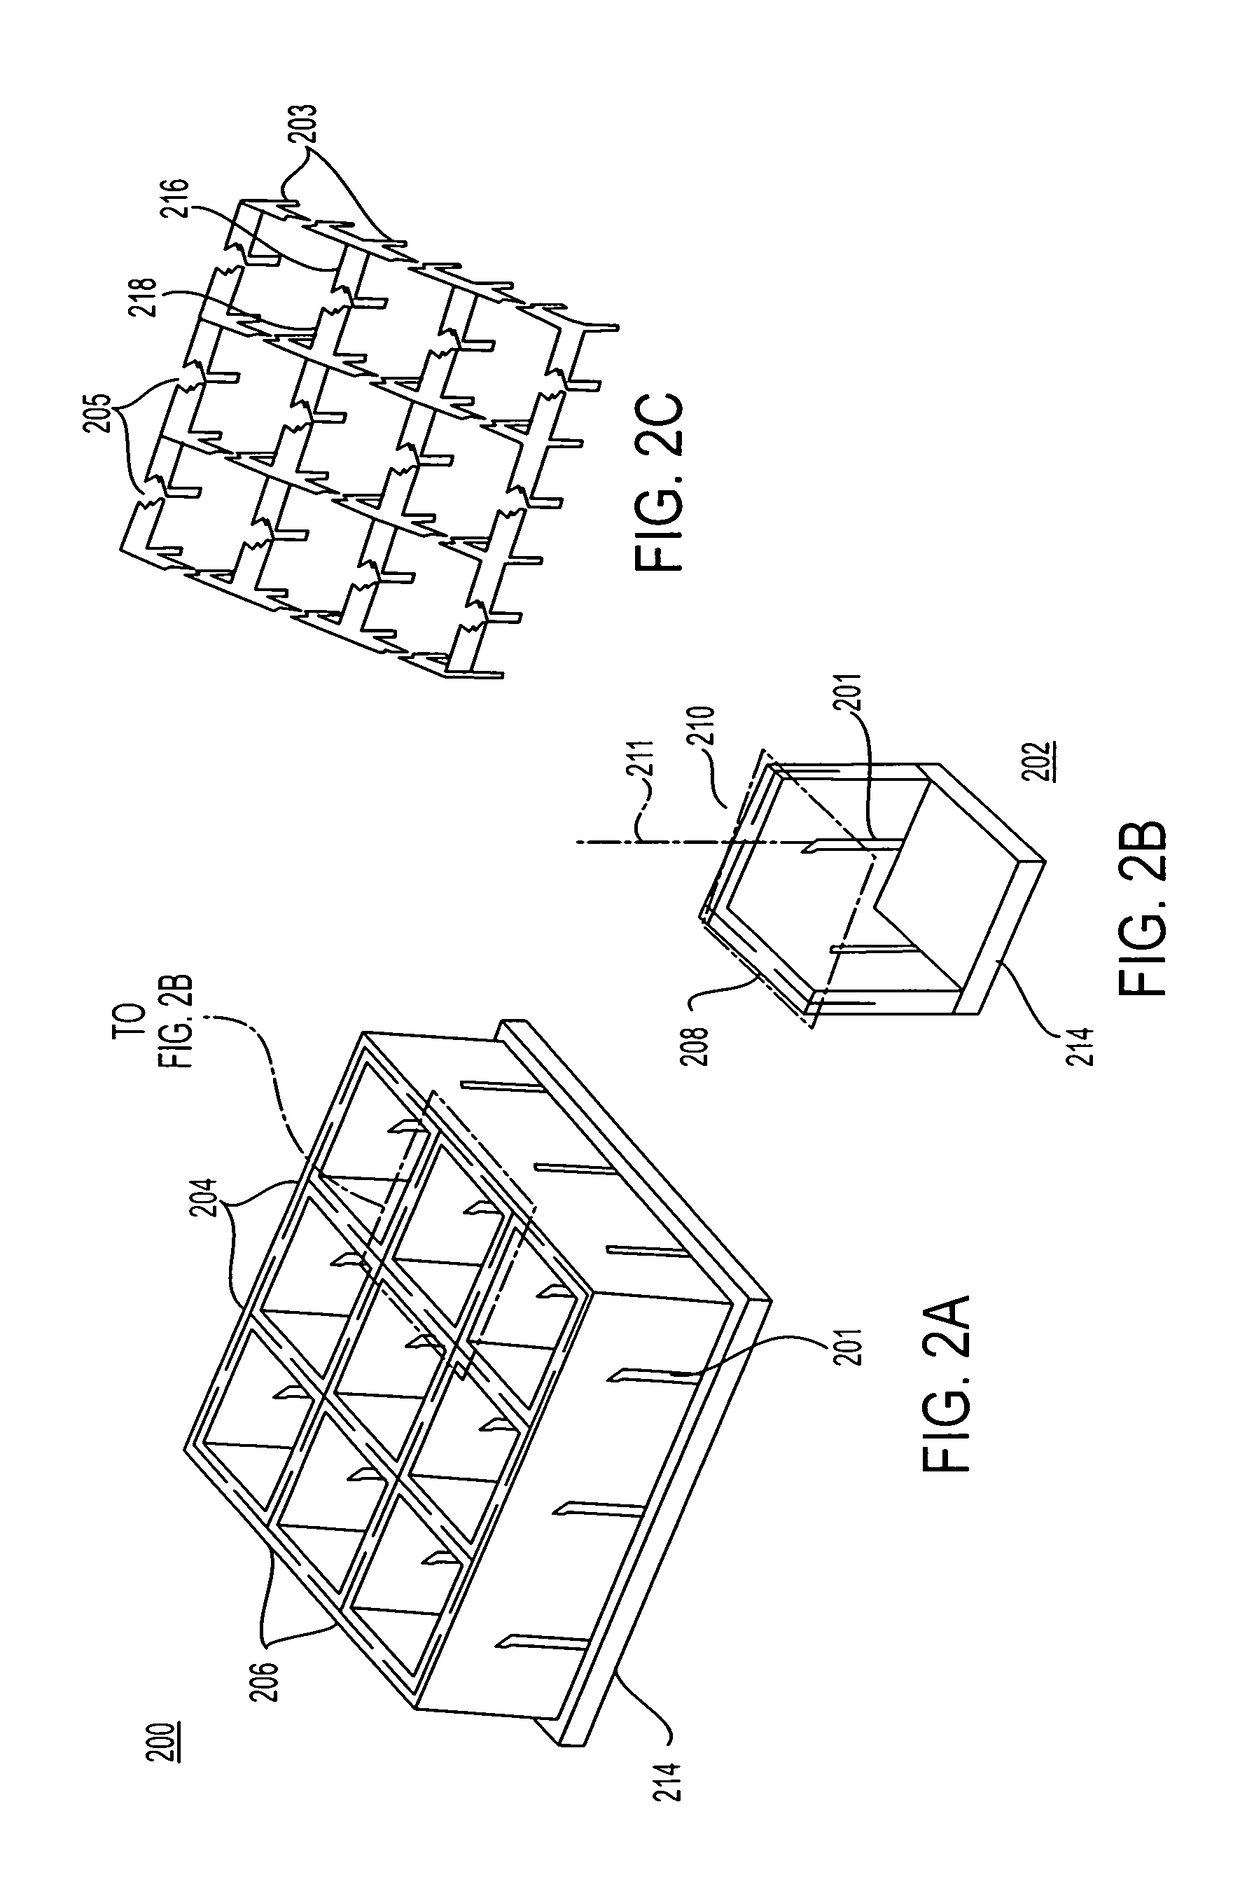 Substrate-loaded frequency-scaled ultra-wide spectrum element